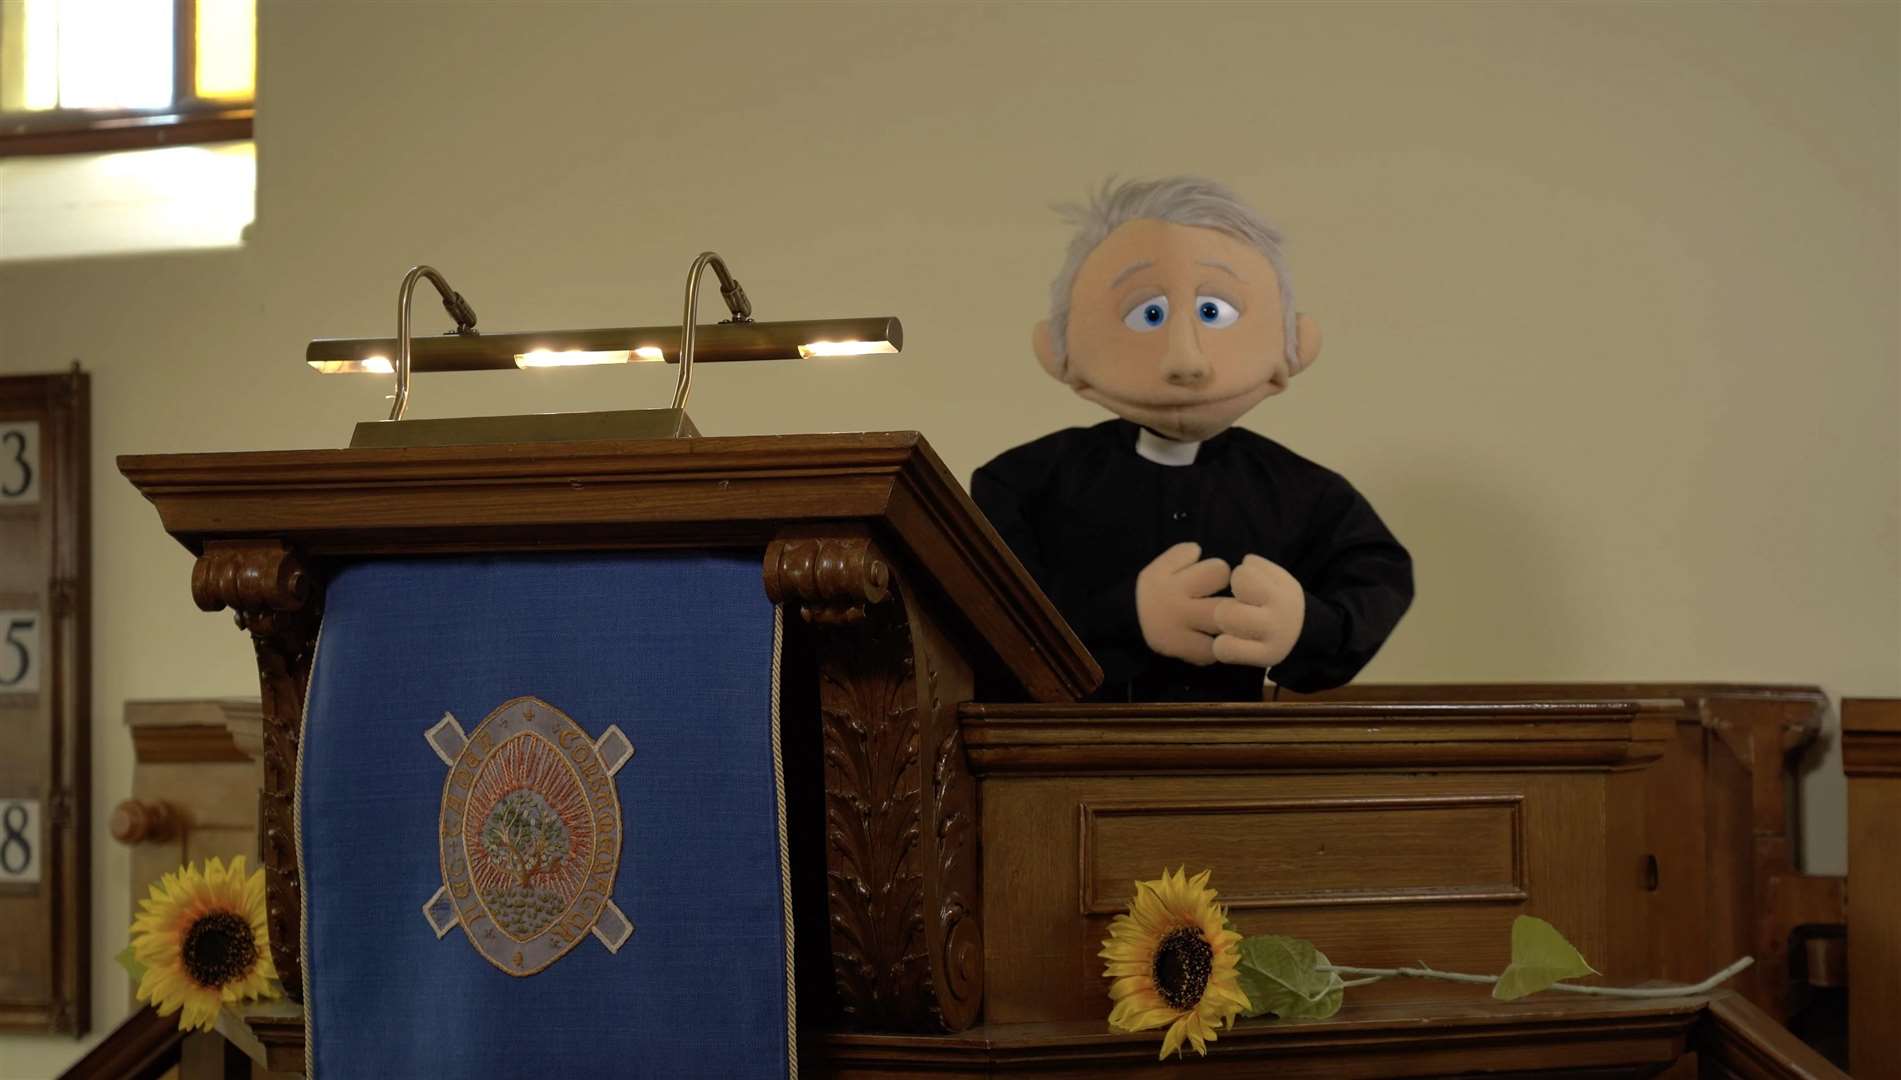 The Intro series, featuring puppets, has been produced by Out of the Box, of Inverness.